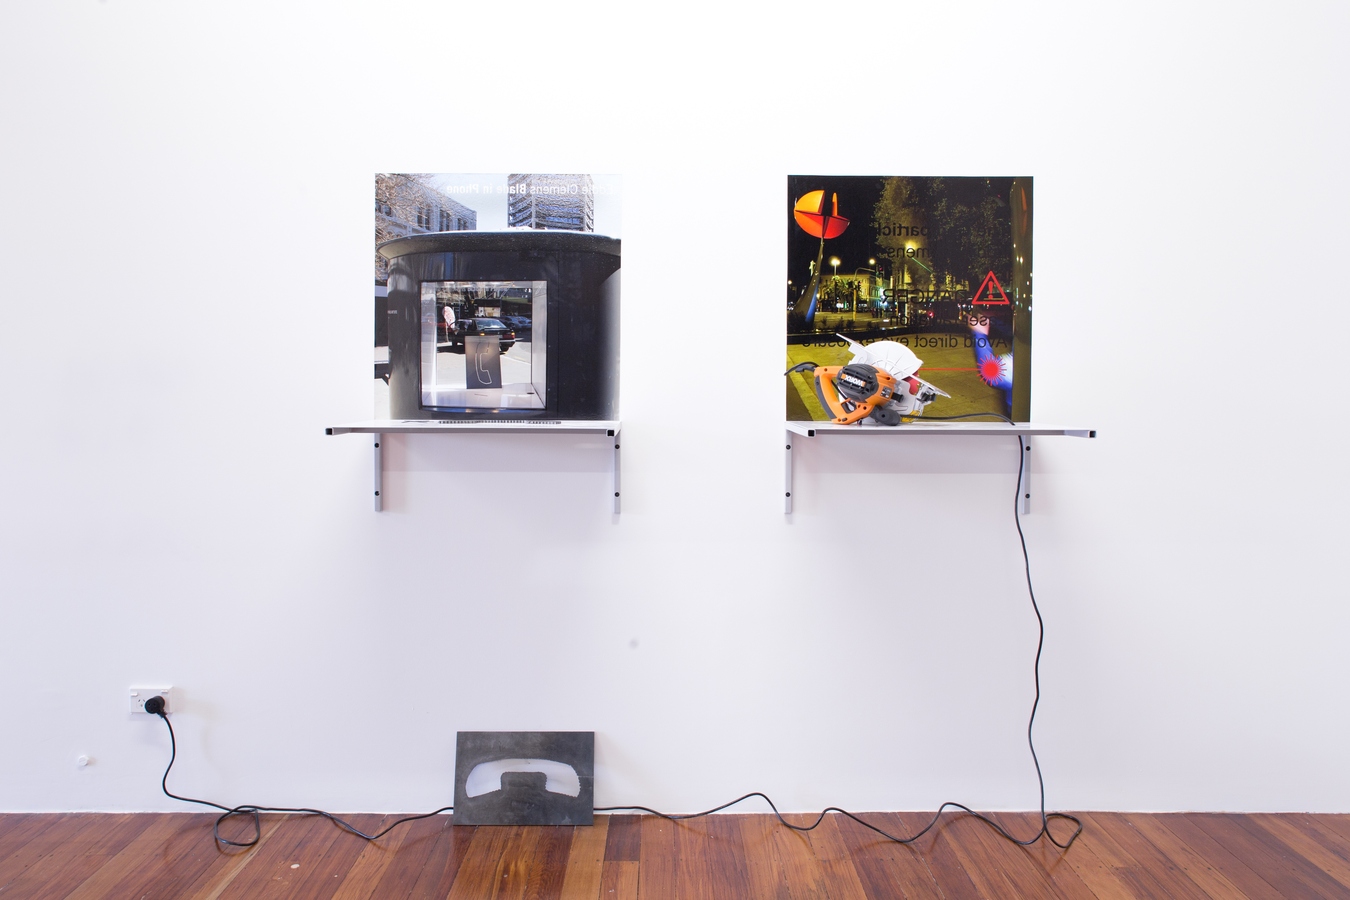 Left: Eddie Clemens, Blade in Phone (installation view), 2009/2020. Right: Eddie Clemens, The God Particle (installation view), 2010/2020. Photo: Janneth Gil.